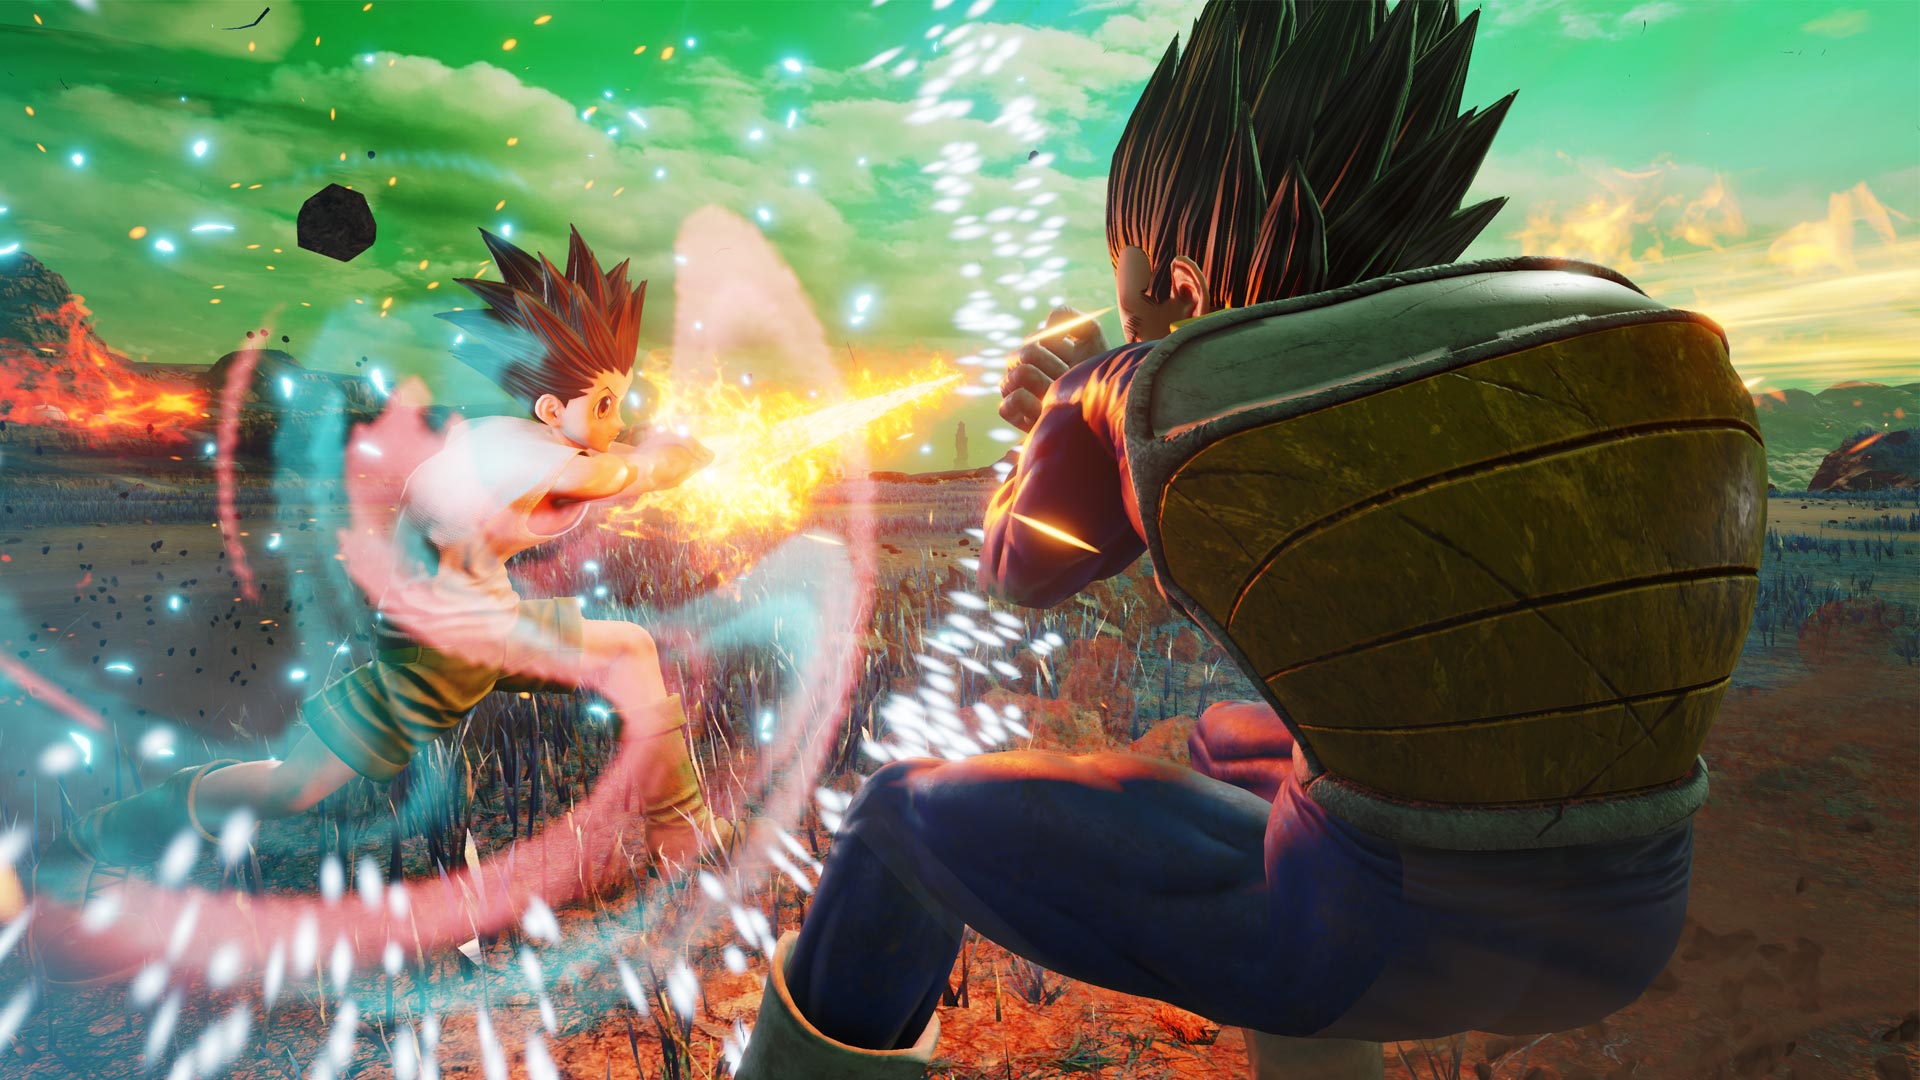 jump force ps4 sale